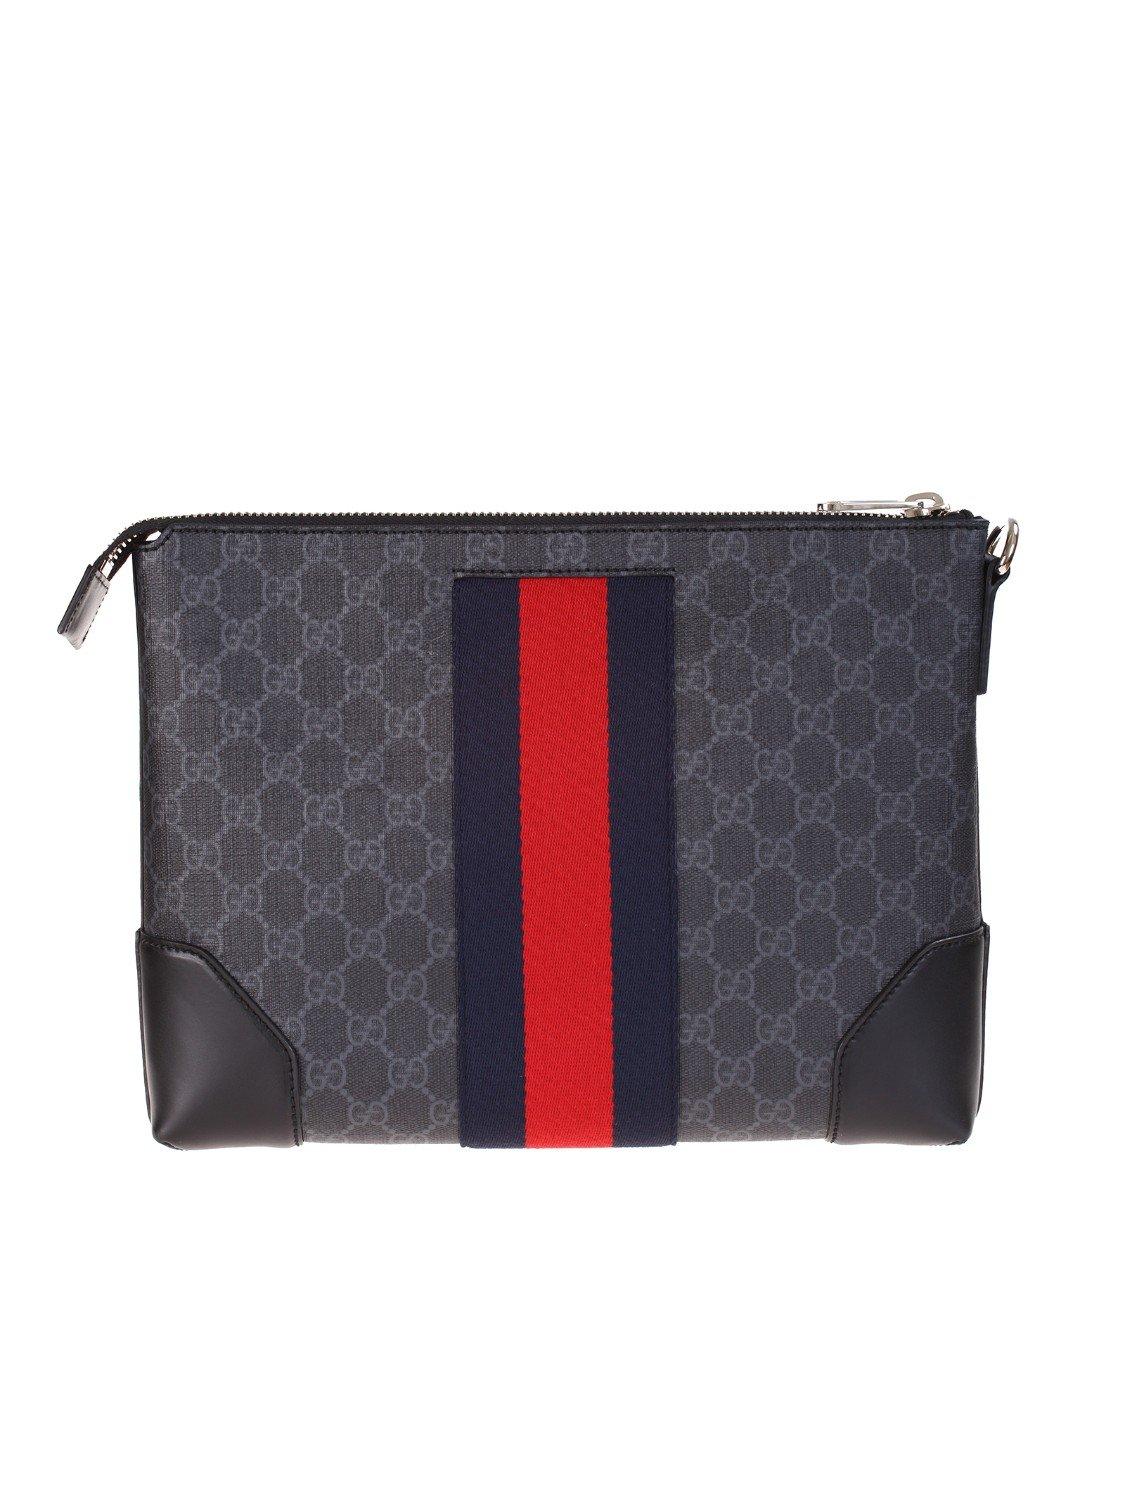 Gucci Pouch With GG Supreme Fabric in Black for Men - Lyst